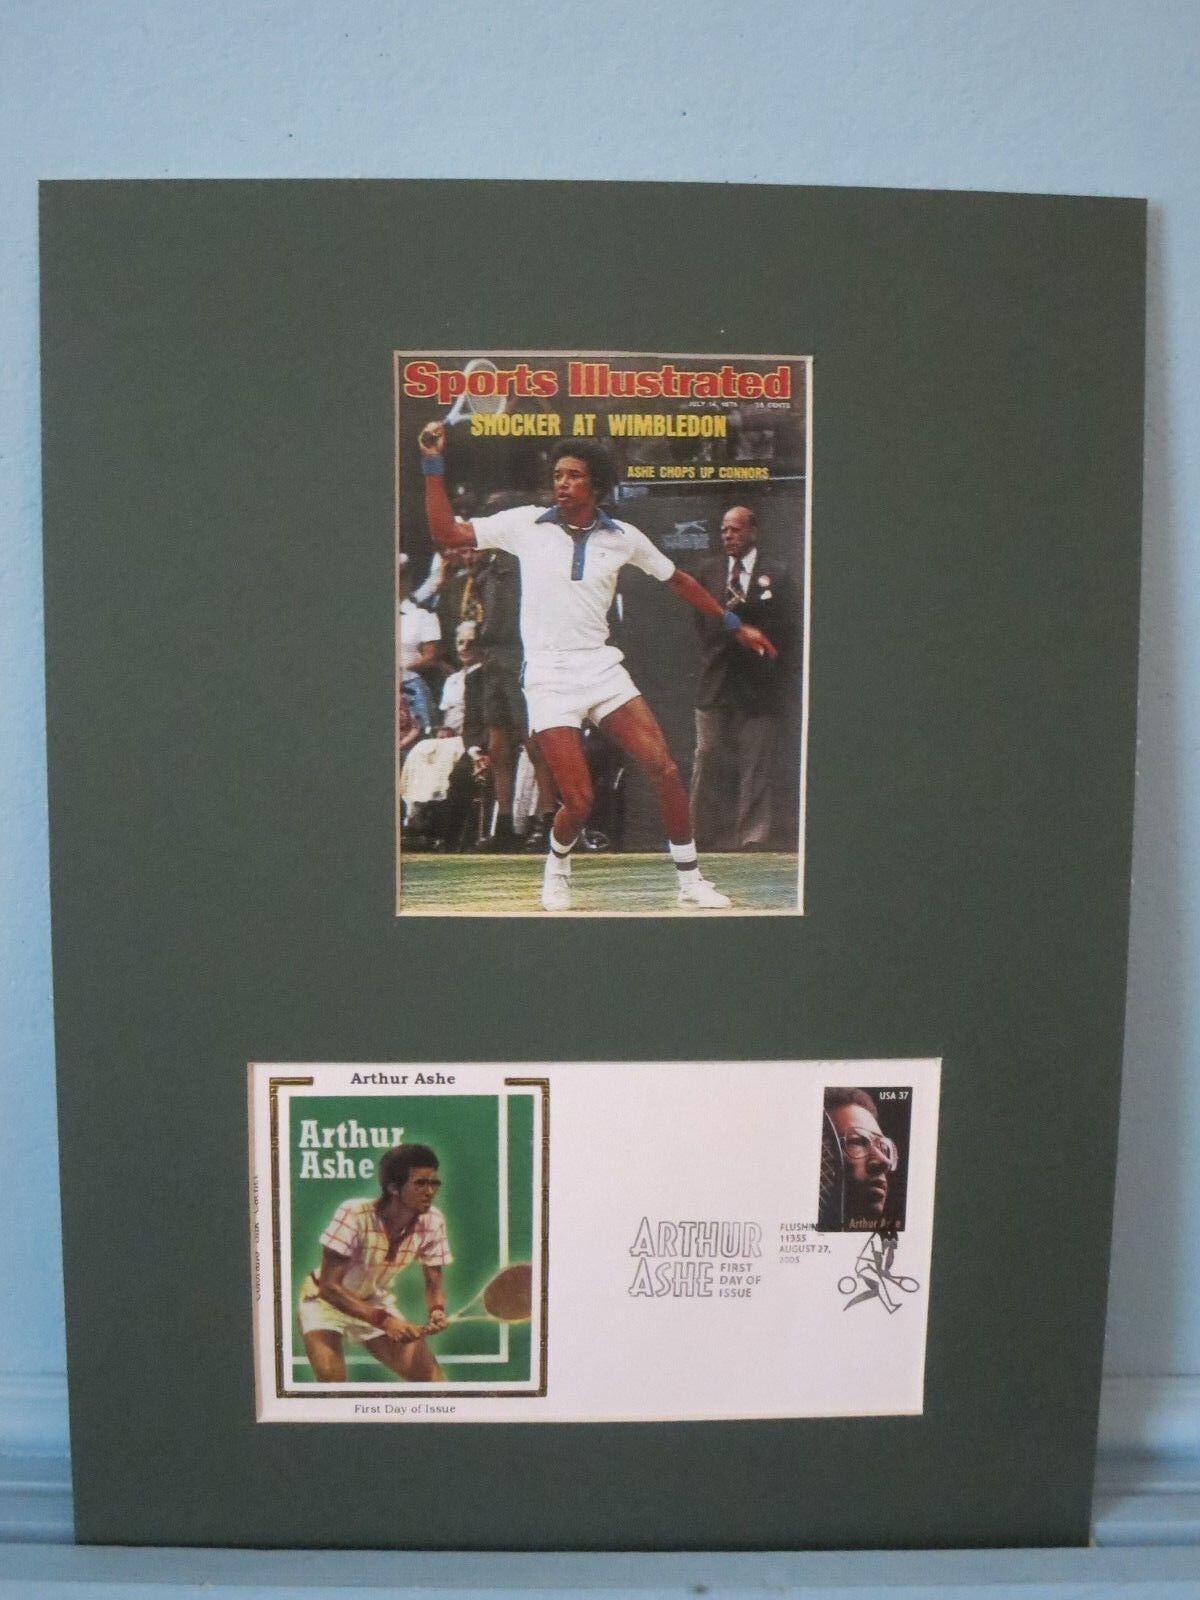 Tennis Great Arthur Ashe wins at Complete Max 71% OFF Free Shipping First Cover Day Wimbledon of